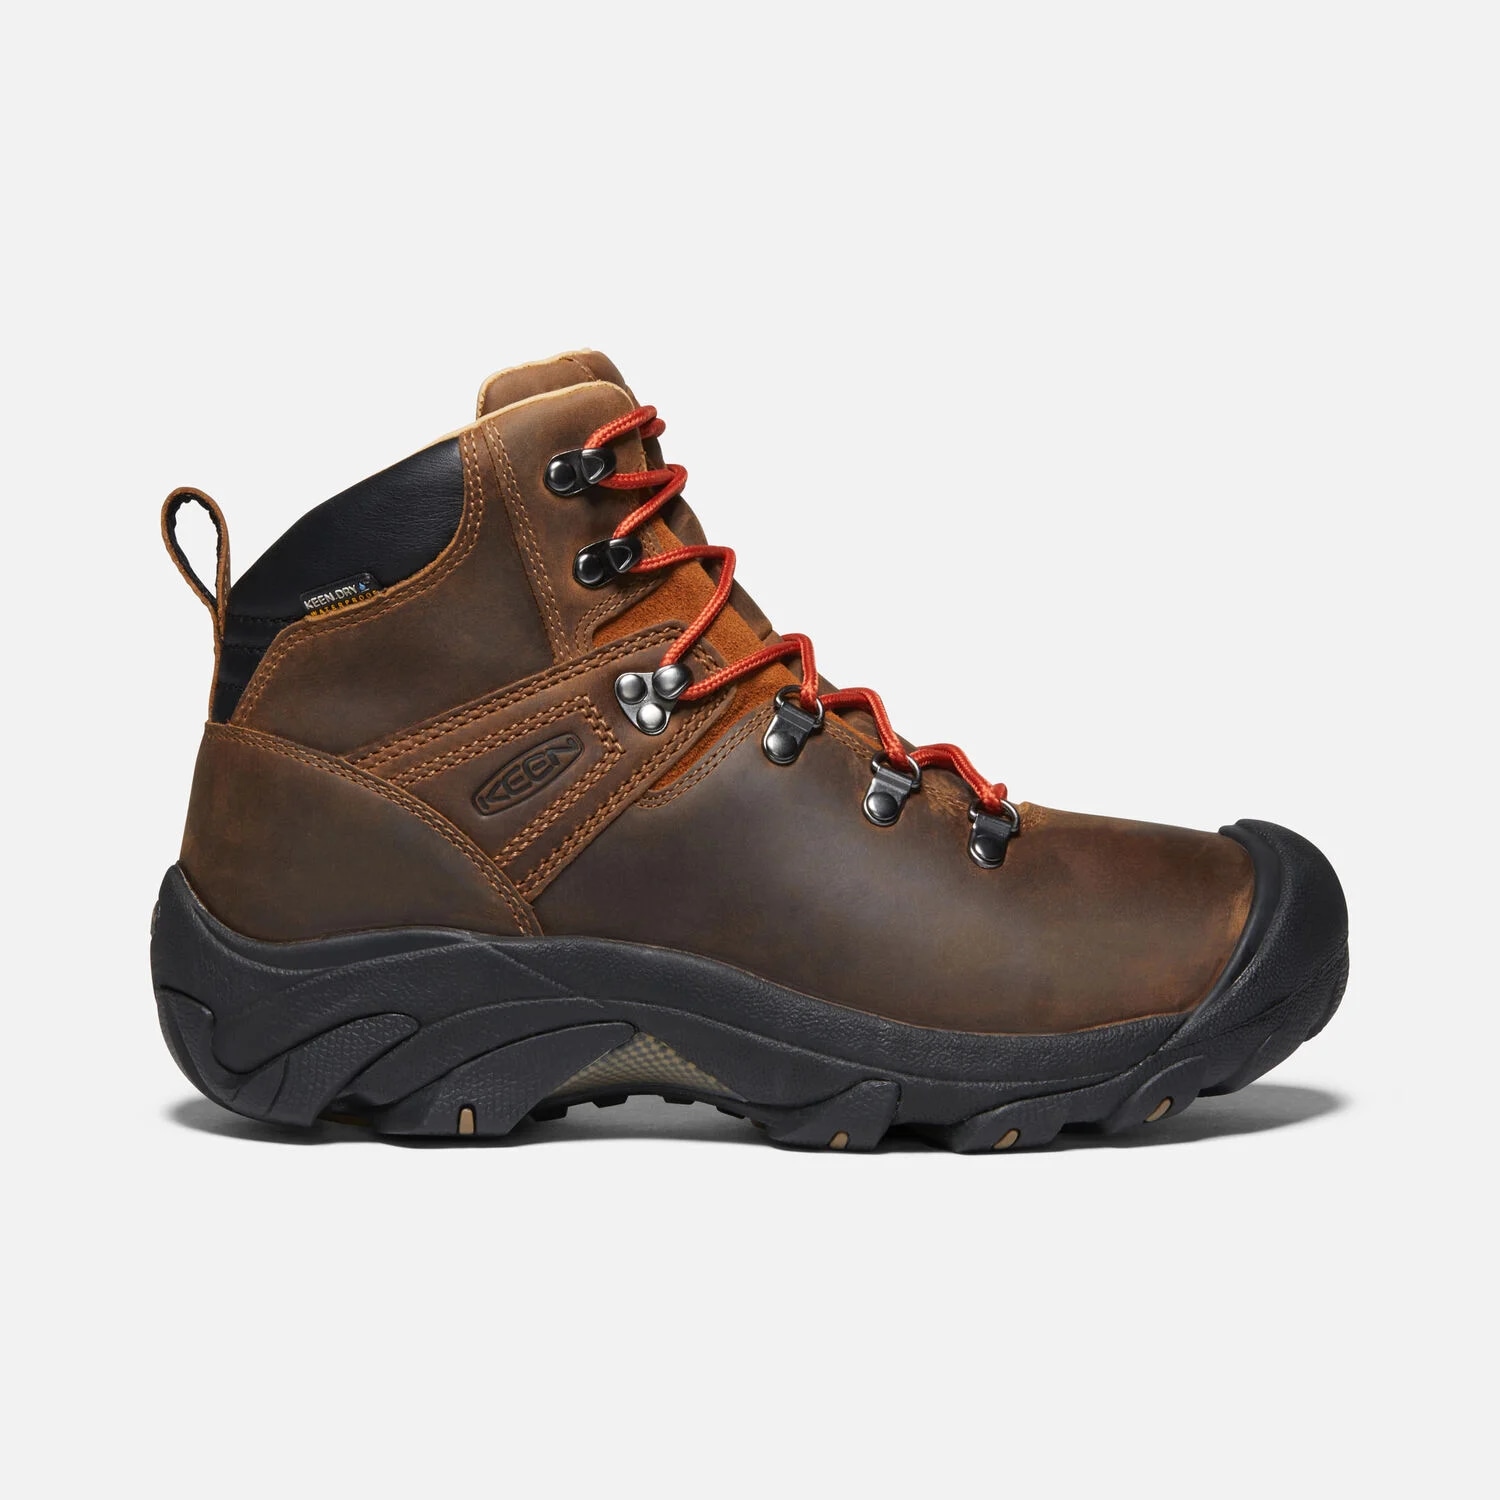 Men's Pyrenees Hiking Boots Syrup